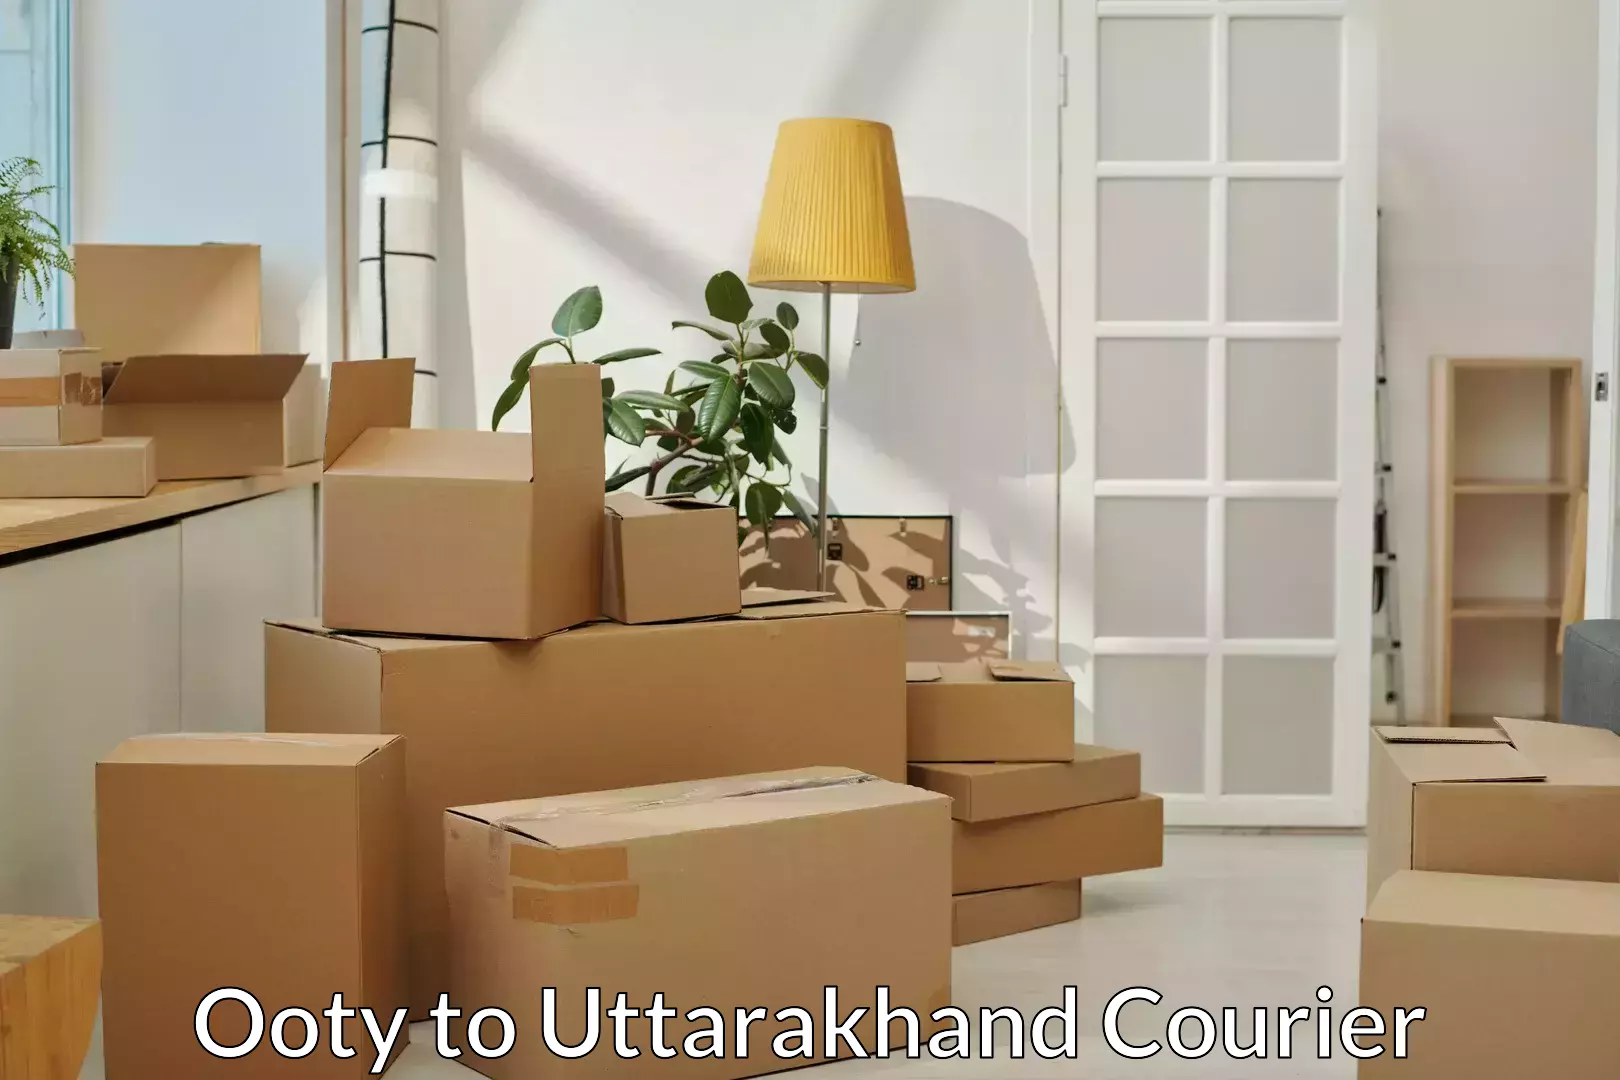 Specialized moving company Ooty to Tehri Garhwal